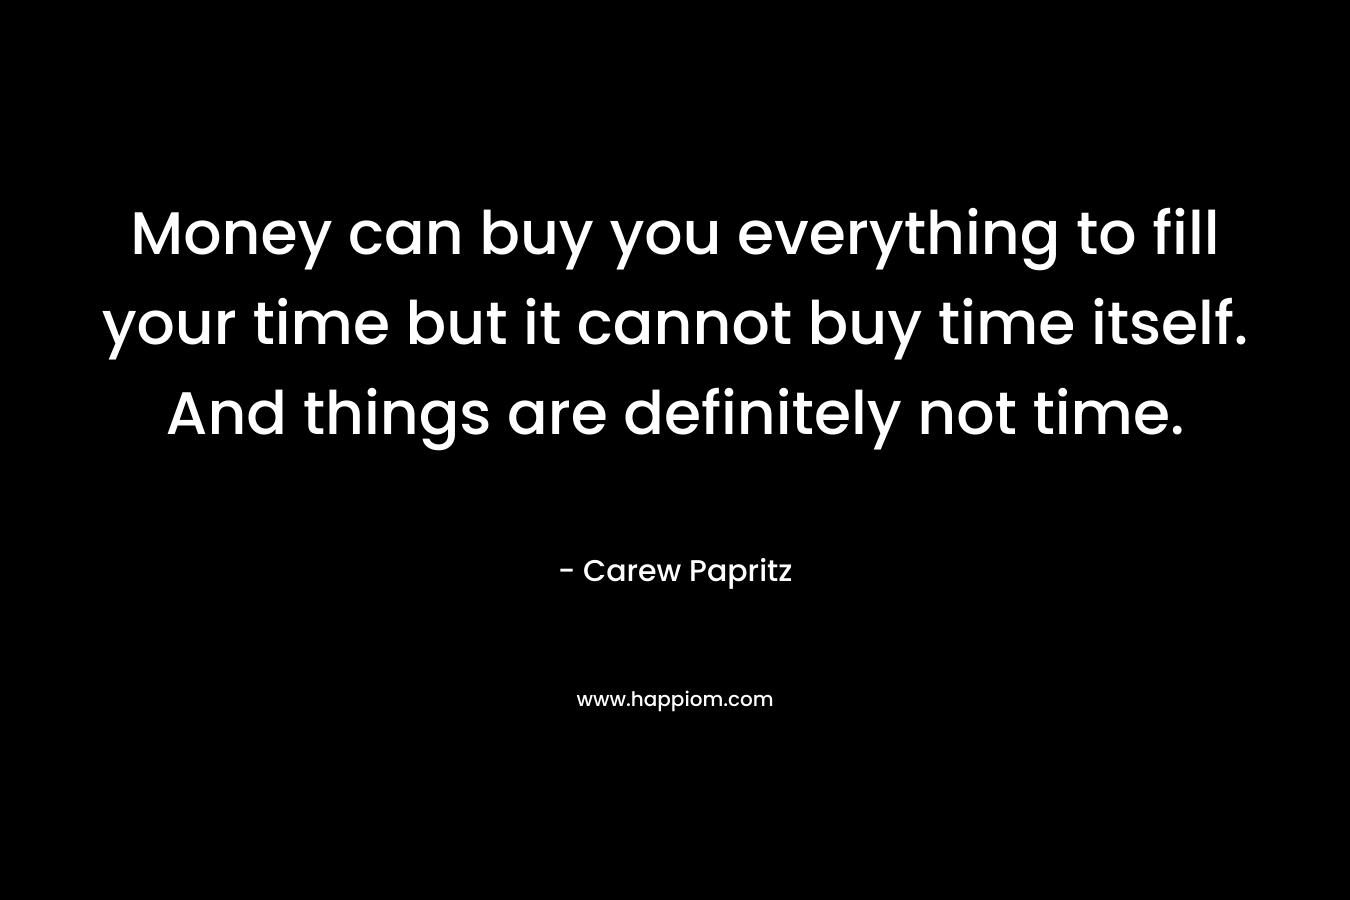 Money can buy you everything to fill your time but it cannot buy time itself. And things are definitely not time.